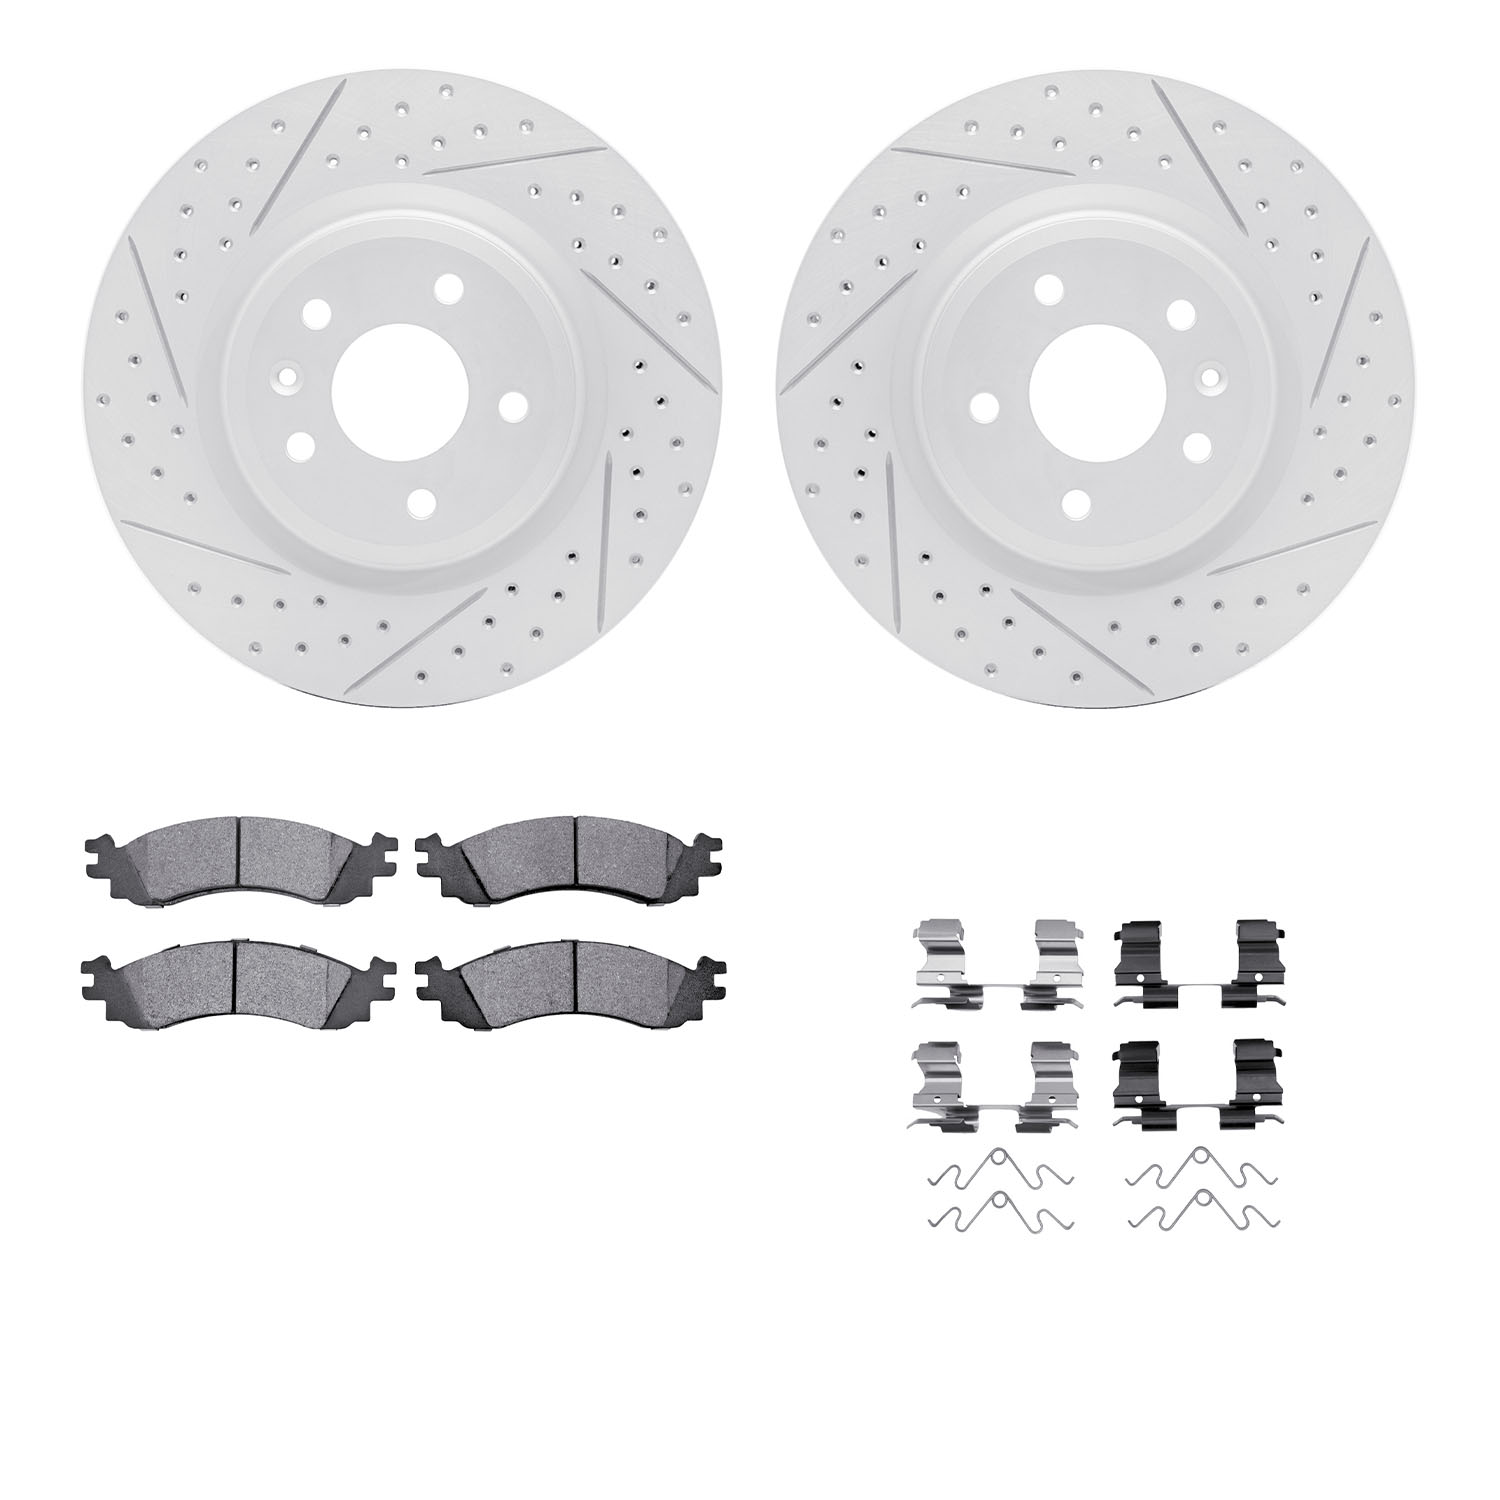 2212-54001 Geoperformance Drilled/Slotted Rotors w/Heavy-Duty Pads Kit & Hardware, 2010-2010 Ford/Lincoln/Mercury/Mazda, Positio